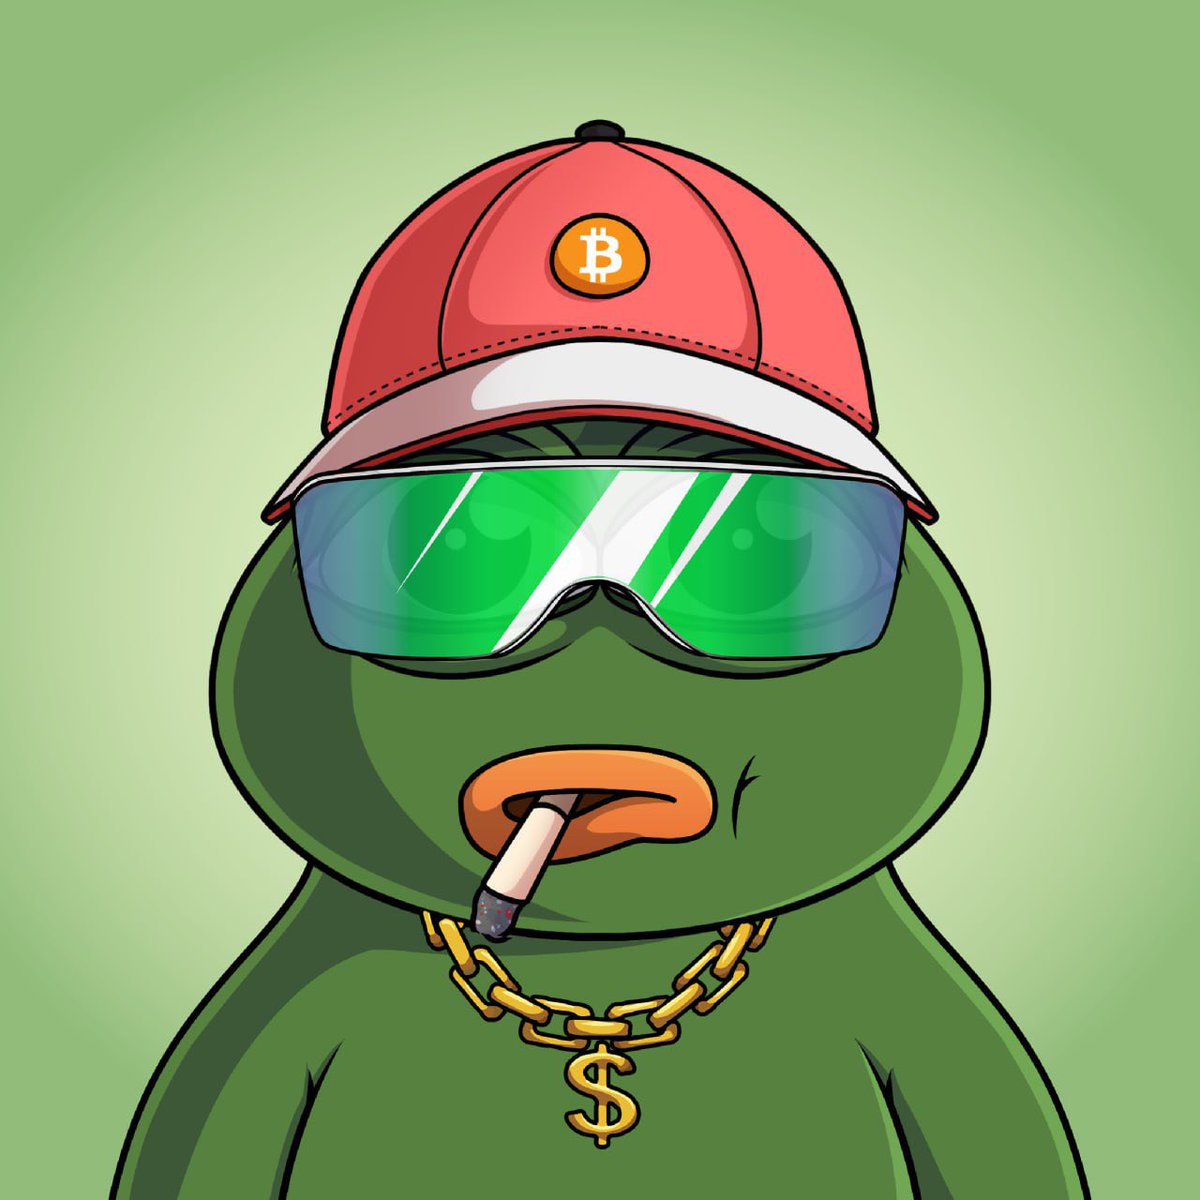 Holding #PEPEARMYNFTS ETH = #OrdinalNFT + $OXGR 

 🟩Membership  
 🟩Hunting coins 
 🟩Free Claim 
 🟩Tools 
 🟩Utility to $pepe holders 
 🟩Shares 
 
More TBA #PEPEARMY Drop 🐸🟩
LikeRt 🟩🟩🟩🟩🟩⬜️⬜️
Turn notifications on 📣